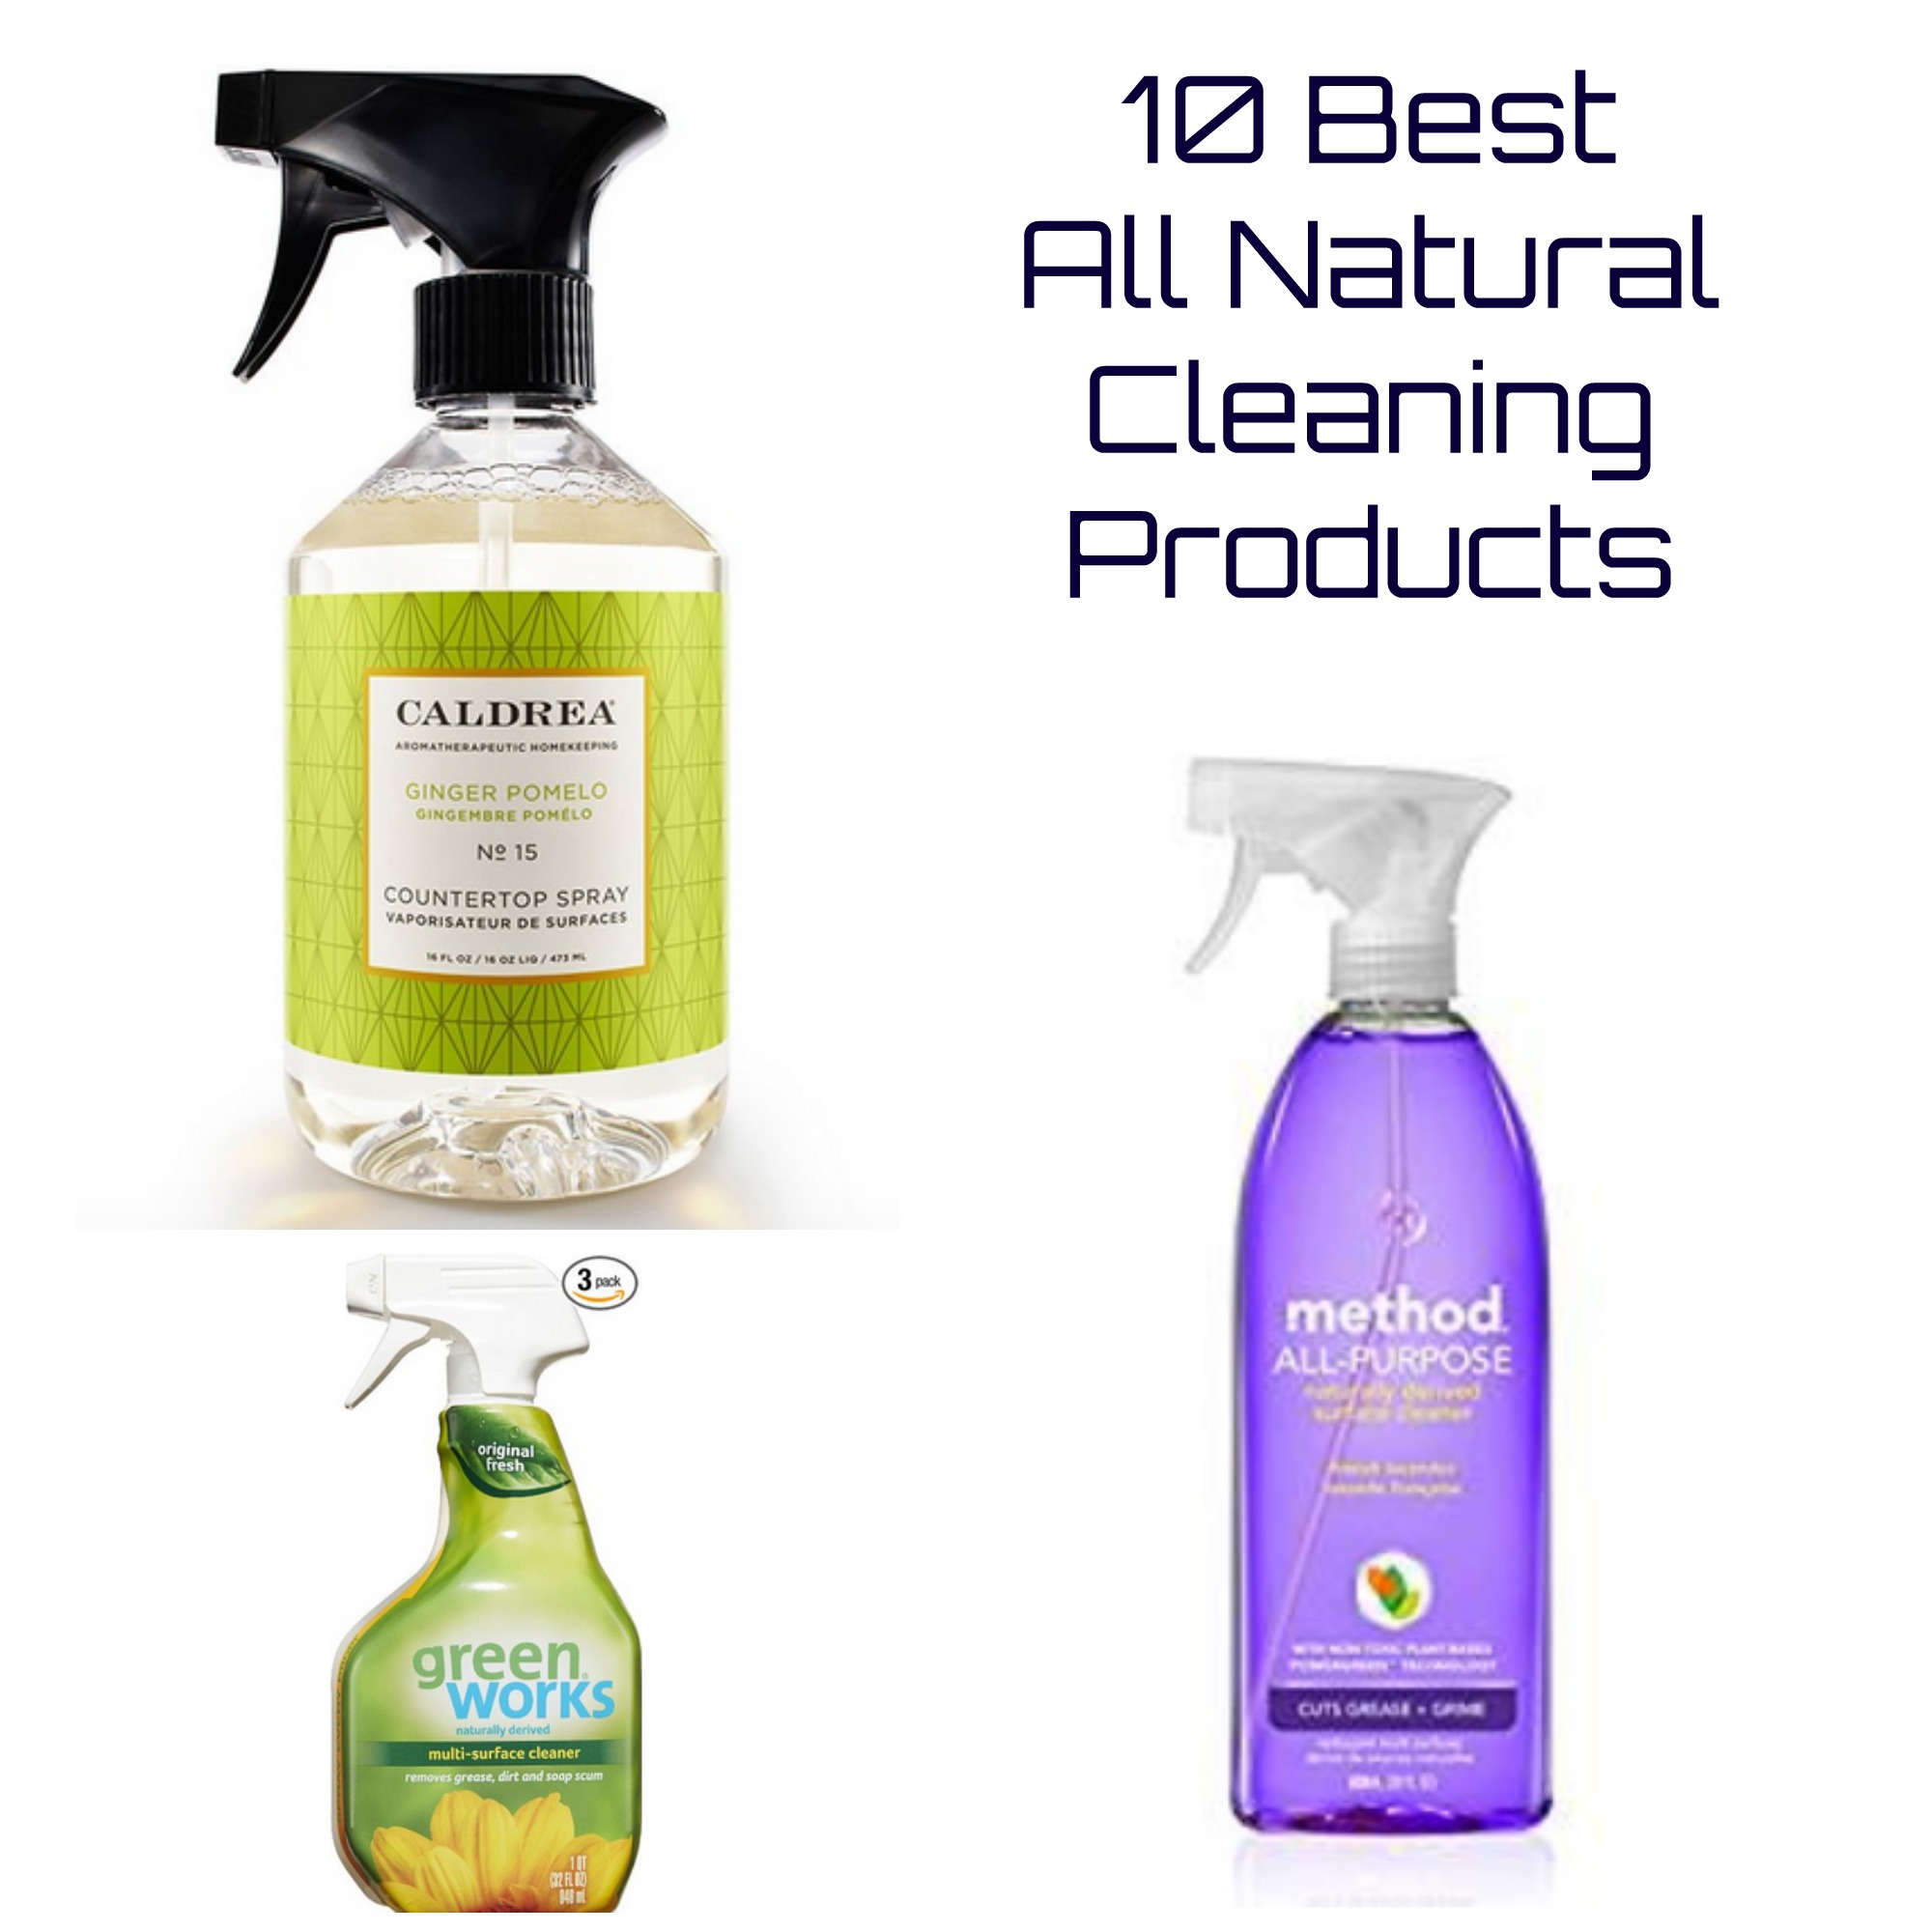 Natural cleaning. Natural Cleaning products фитонцидами. Мыло the best Organic product. Organic Cleaning products. Cleaning nature.